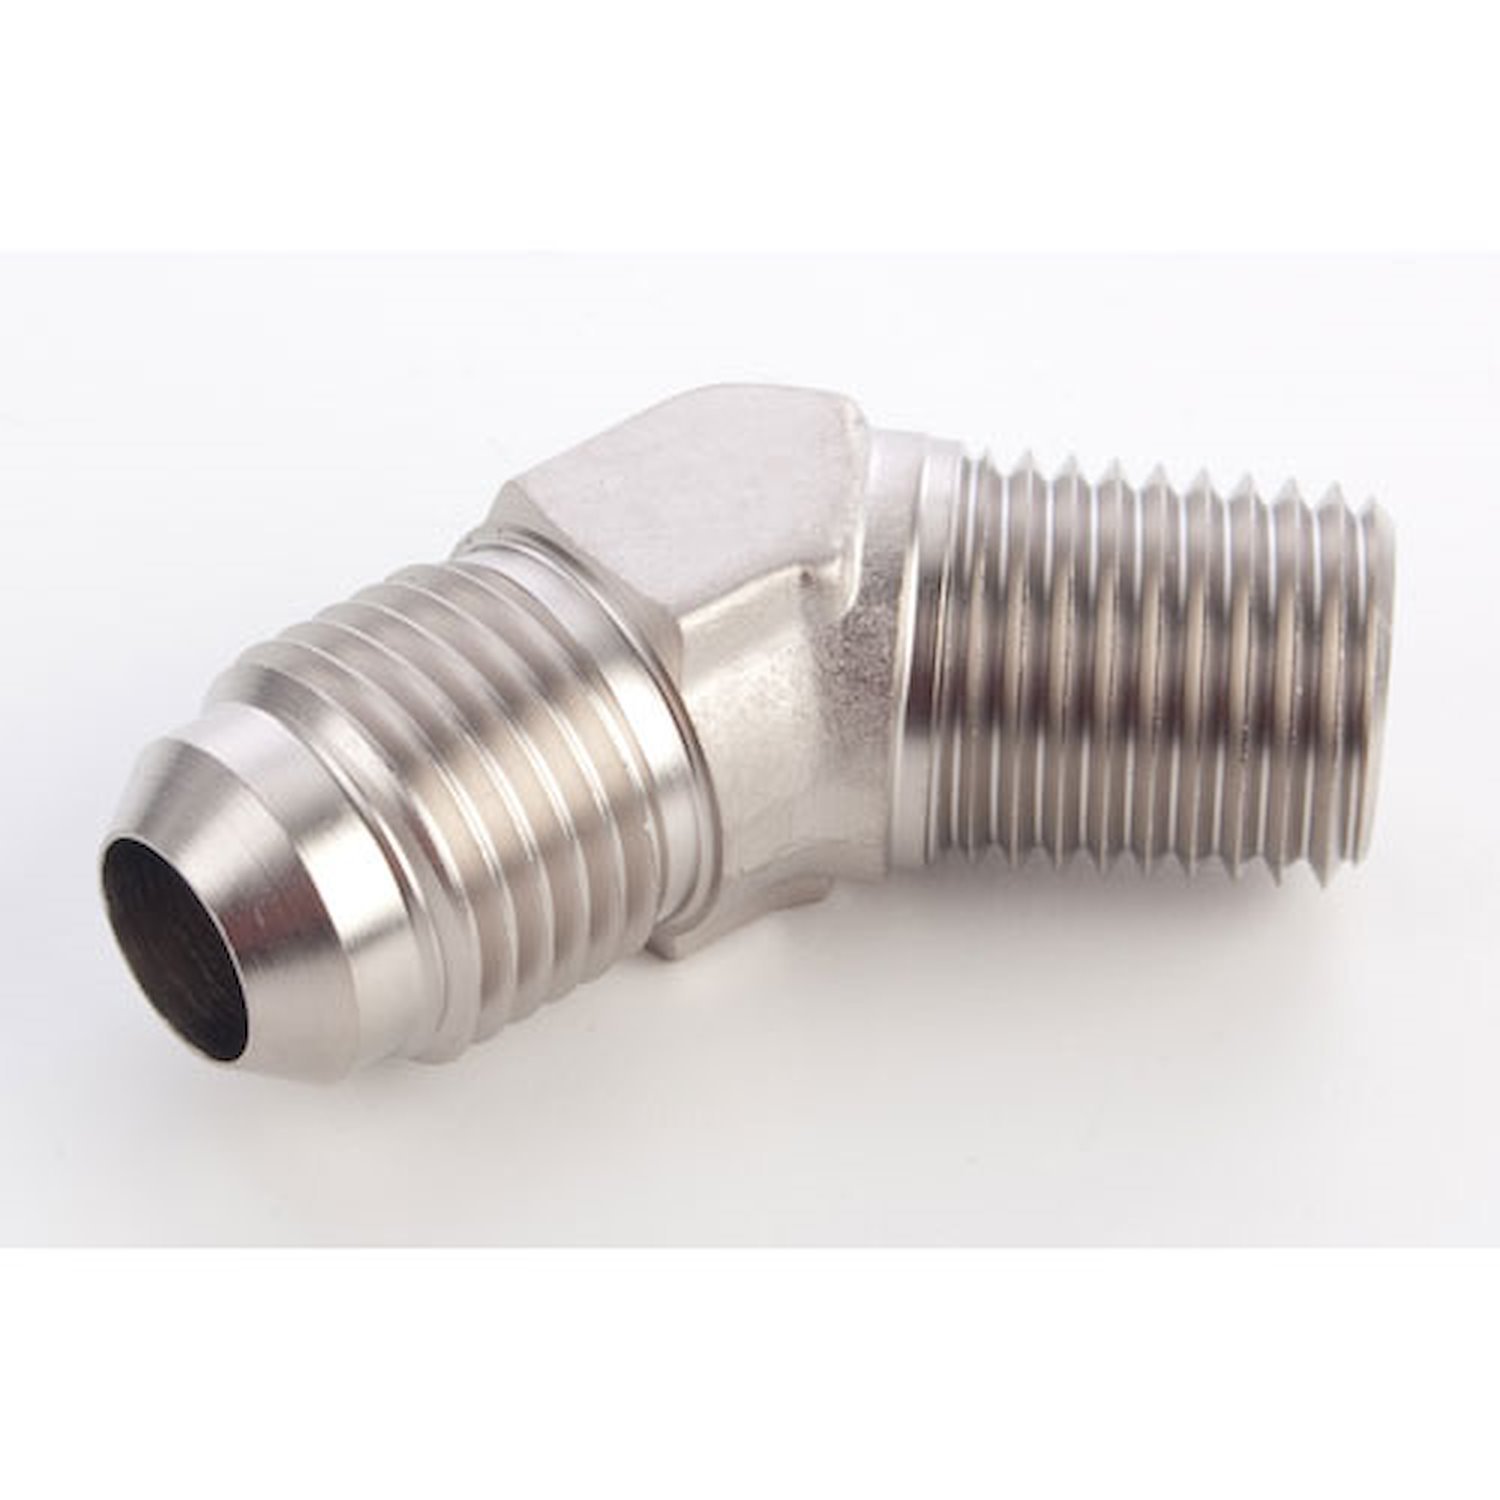 Nickel 45 degree Flare Fitting [1/4 in. NPT